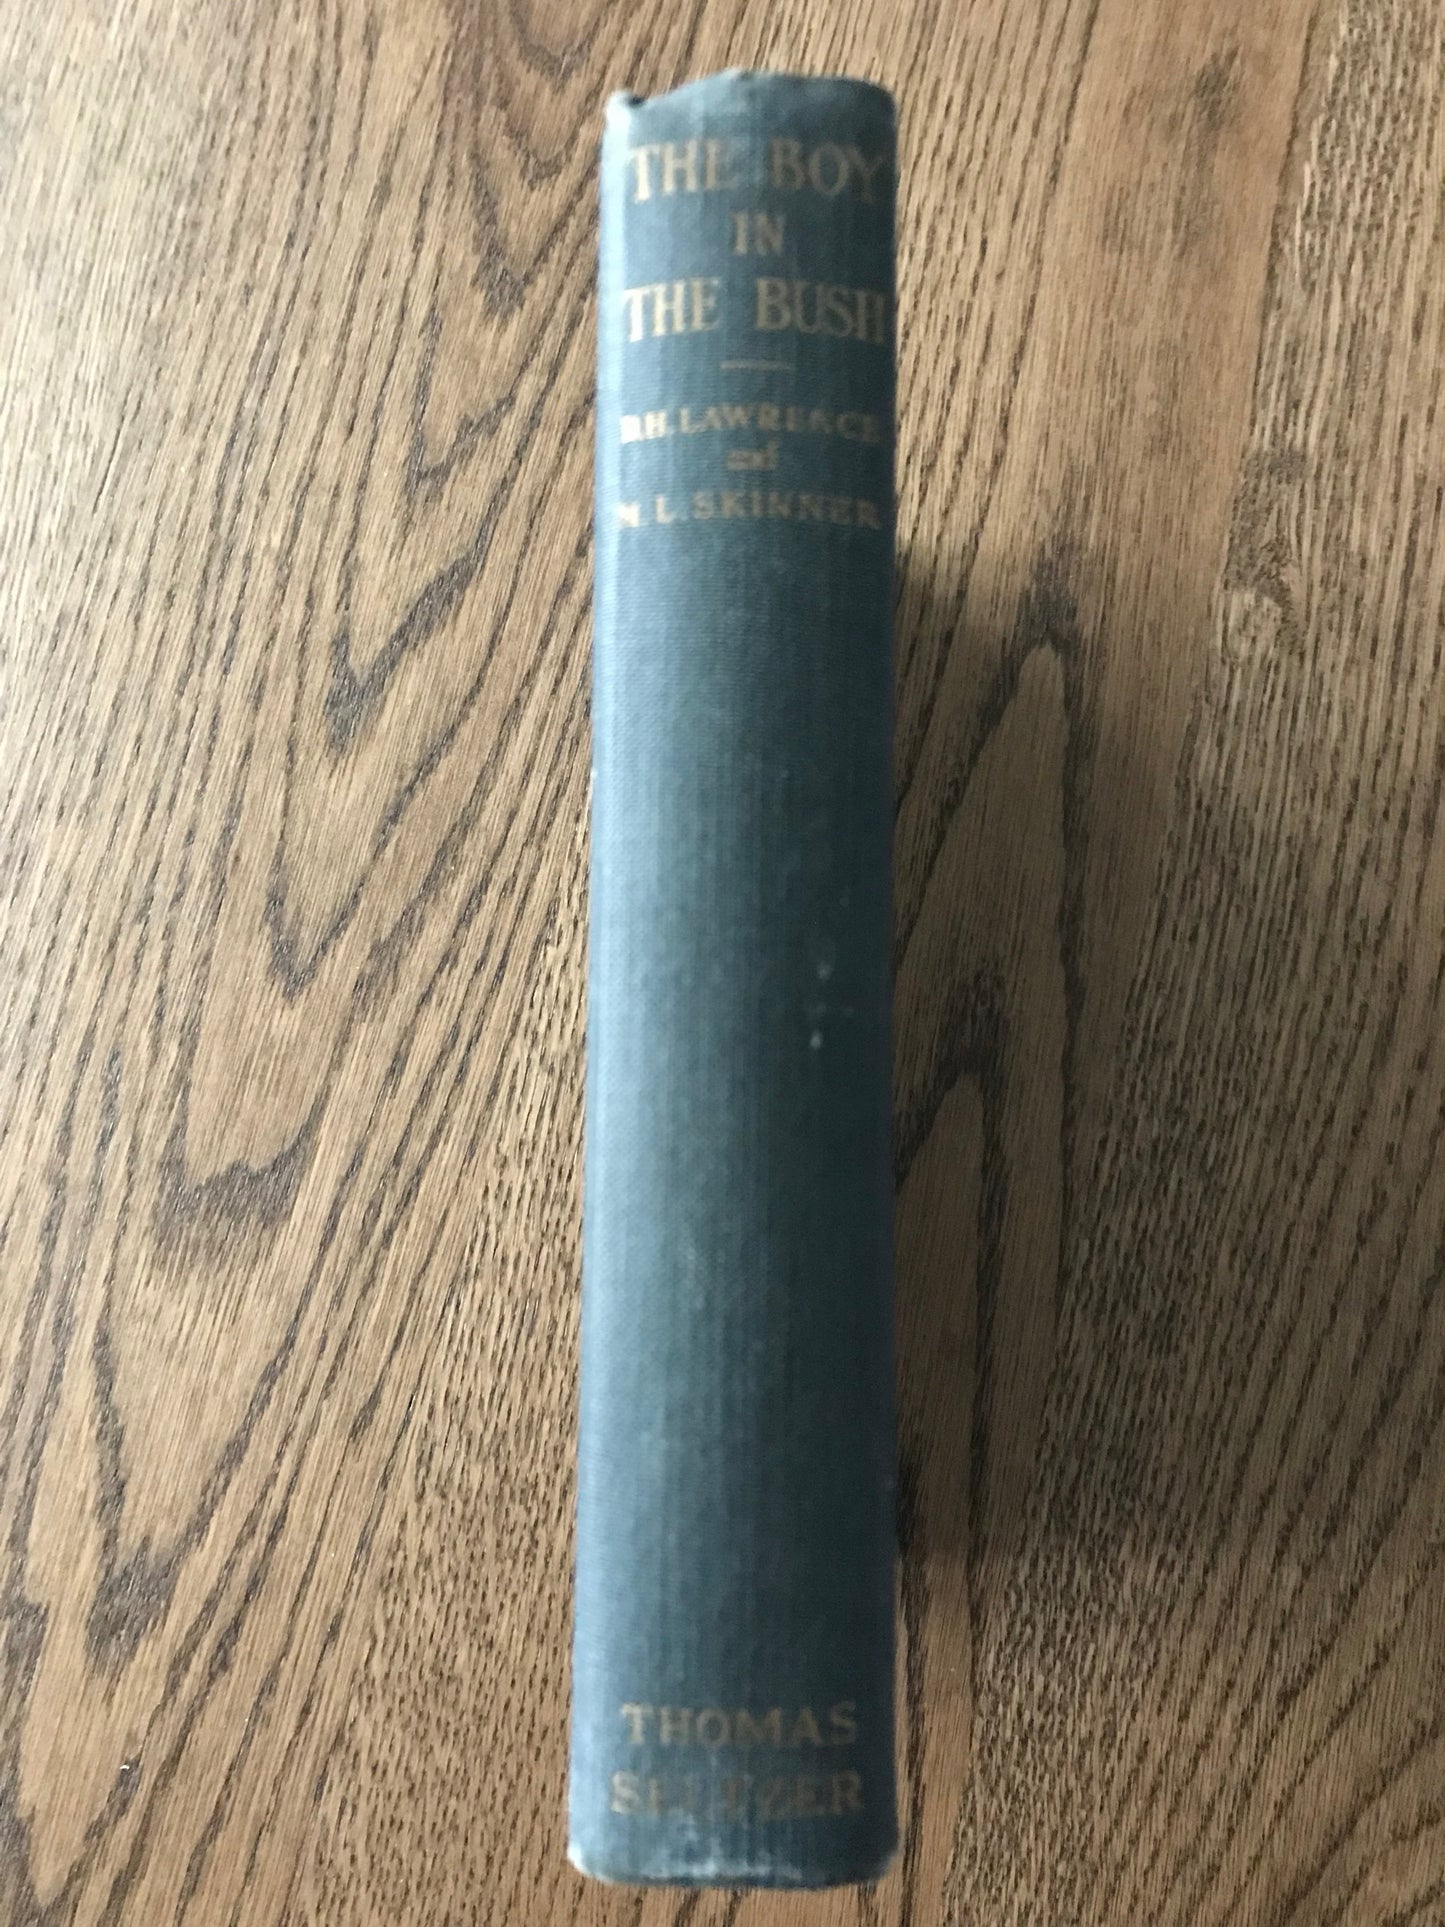 THE BOY IN THE BUSH -  D.H. LAWRENCE  AND M.L. SKINNER BooksCardsNBikes